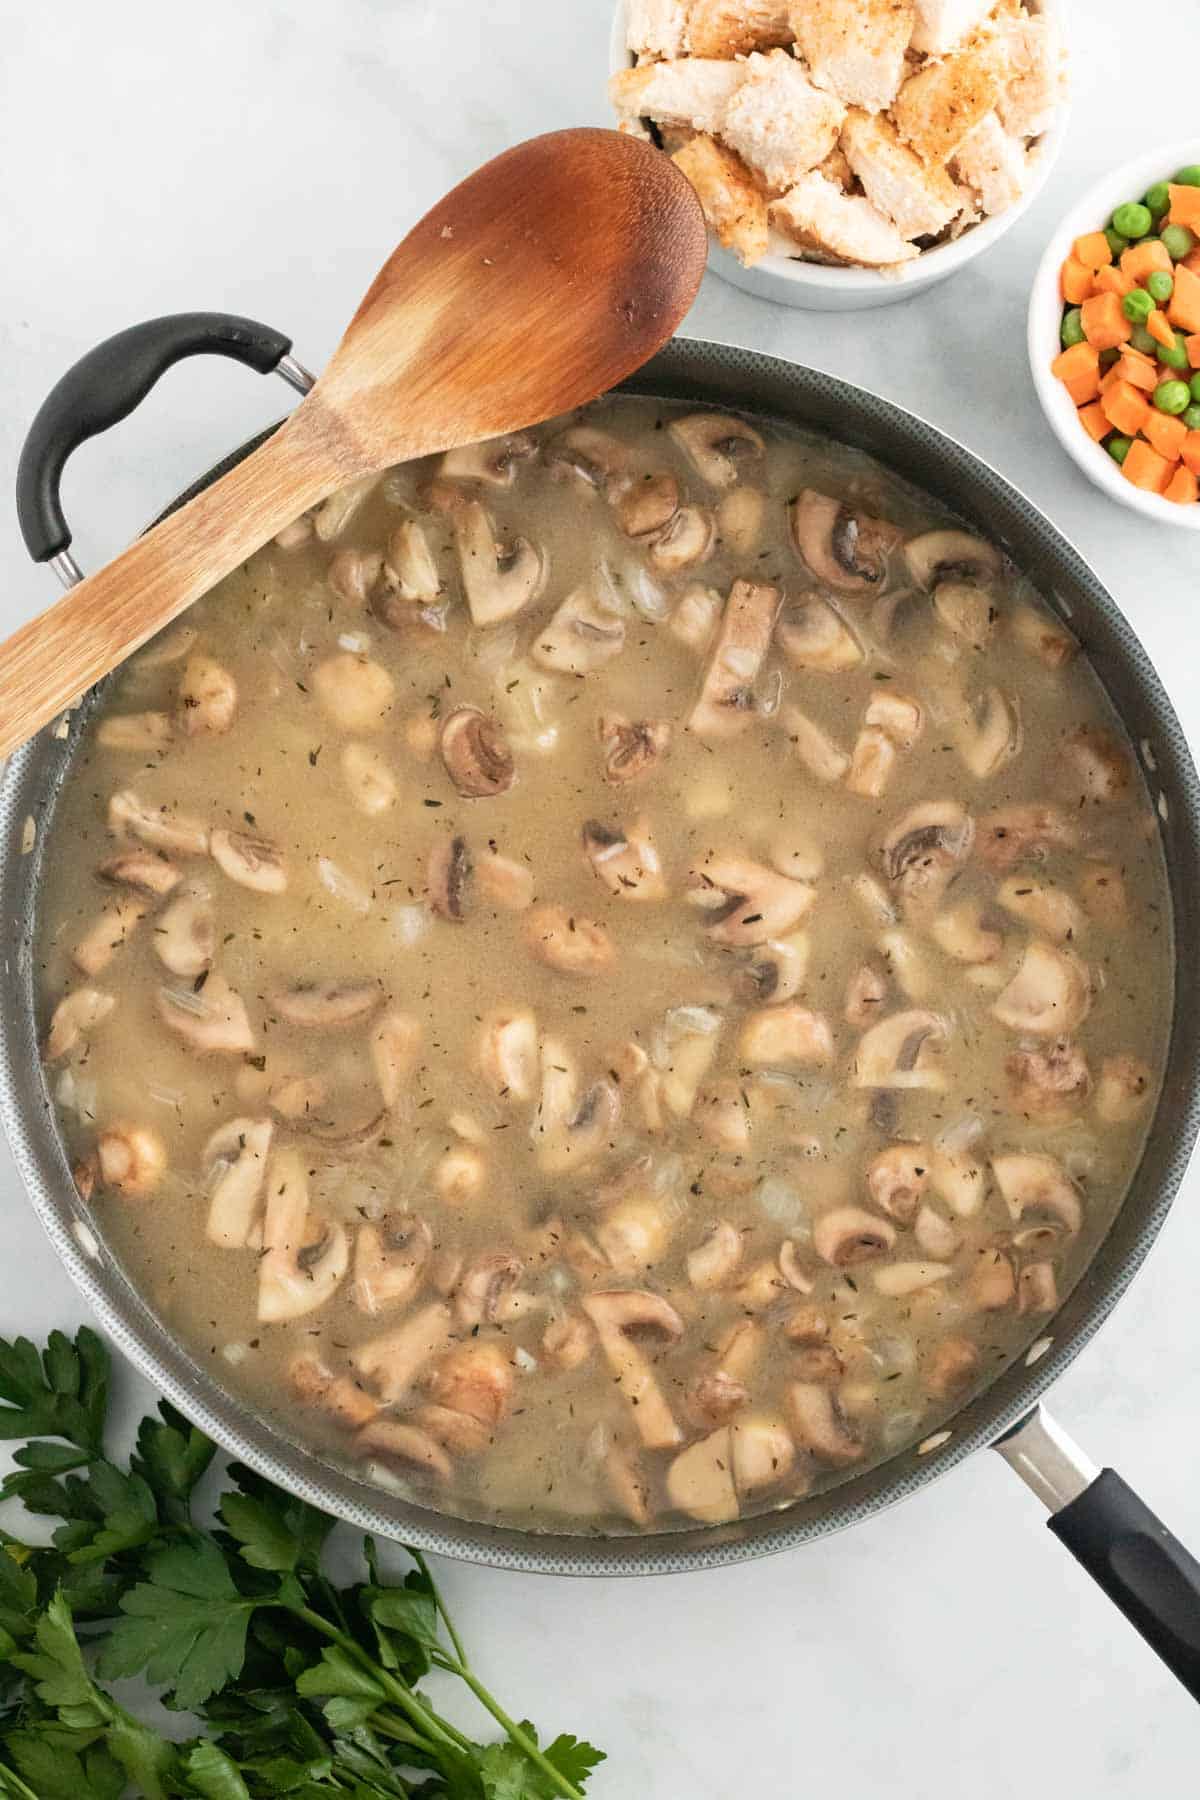 Rice and chicken broth is added to a skillet with mushrooms.